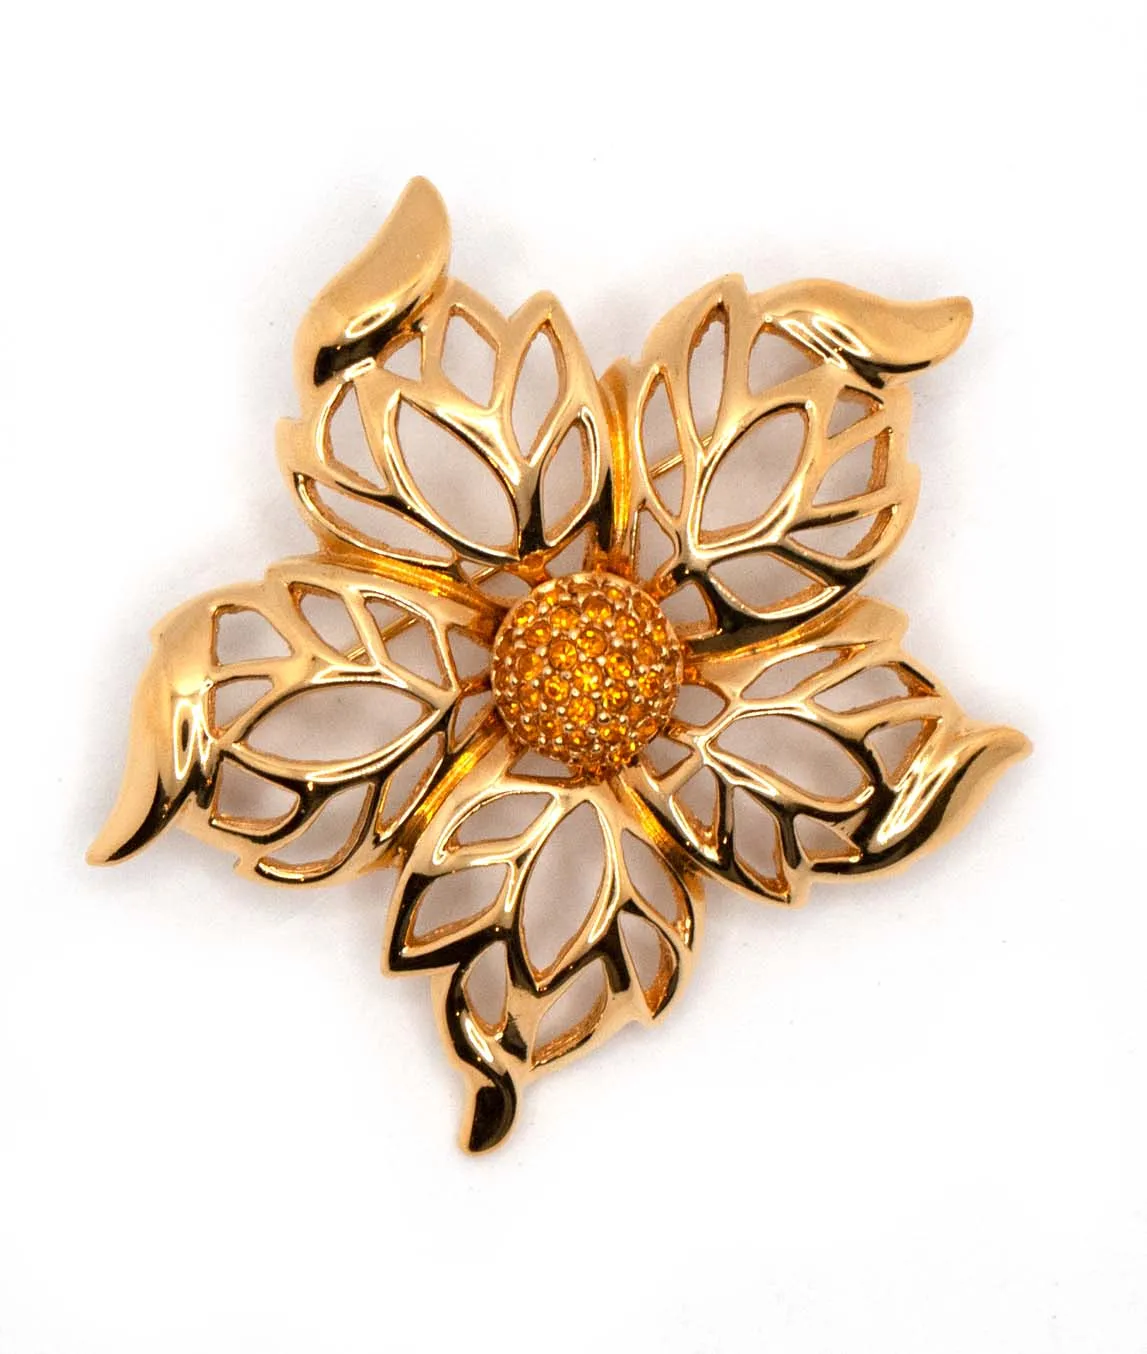 Gold and orange vintage brooch pin by Christian Dior